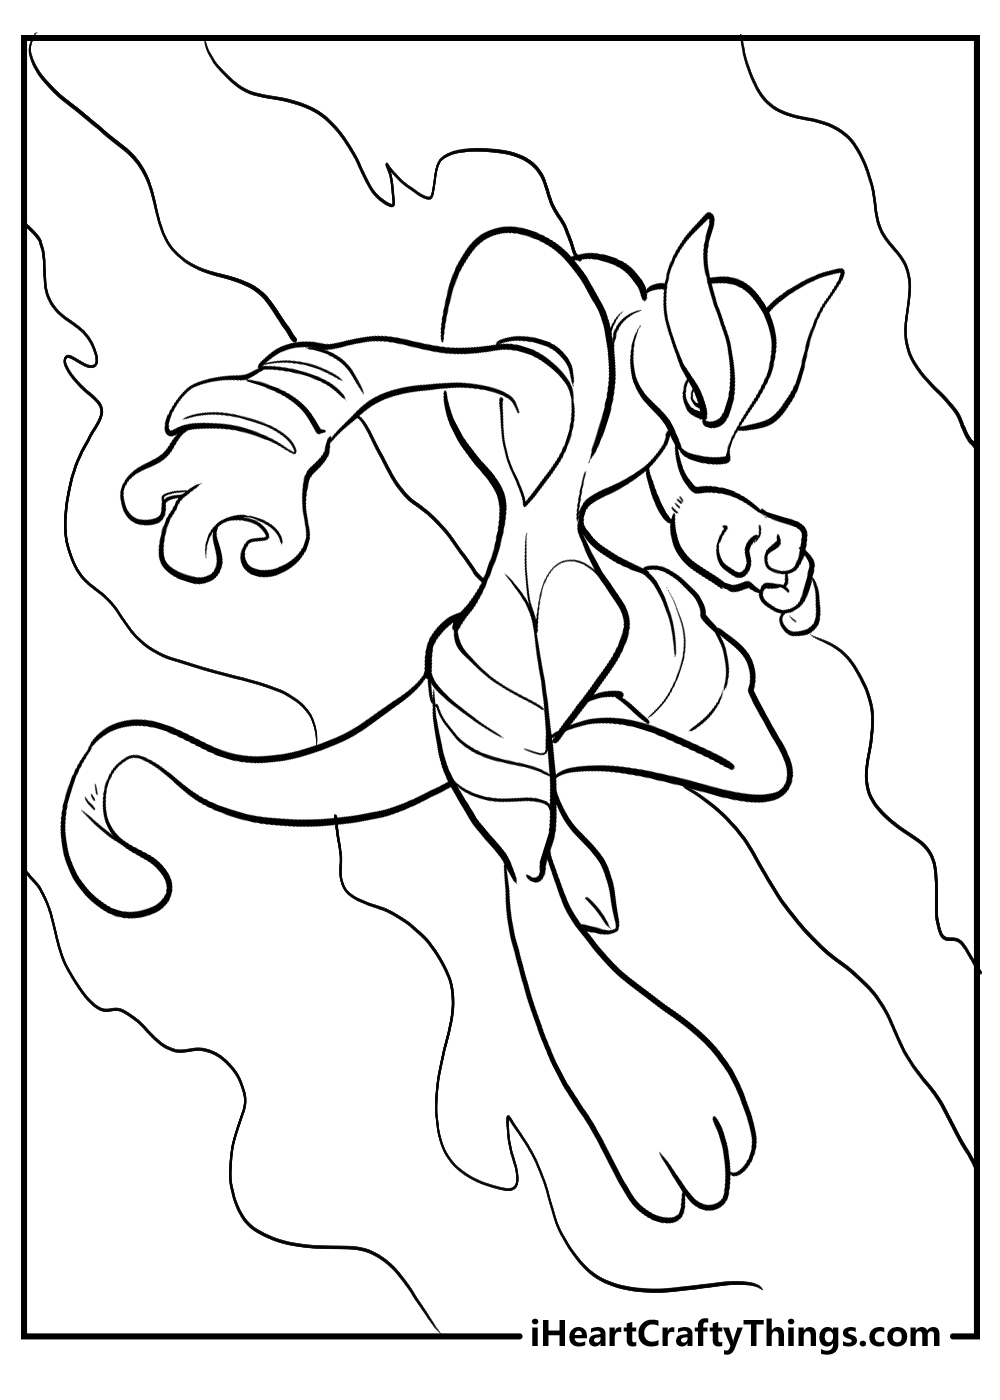 Printable mewtwo coloring pages updated